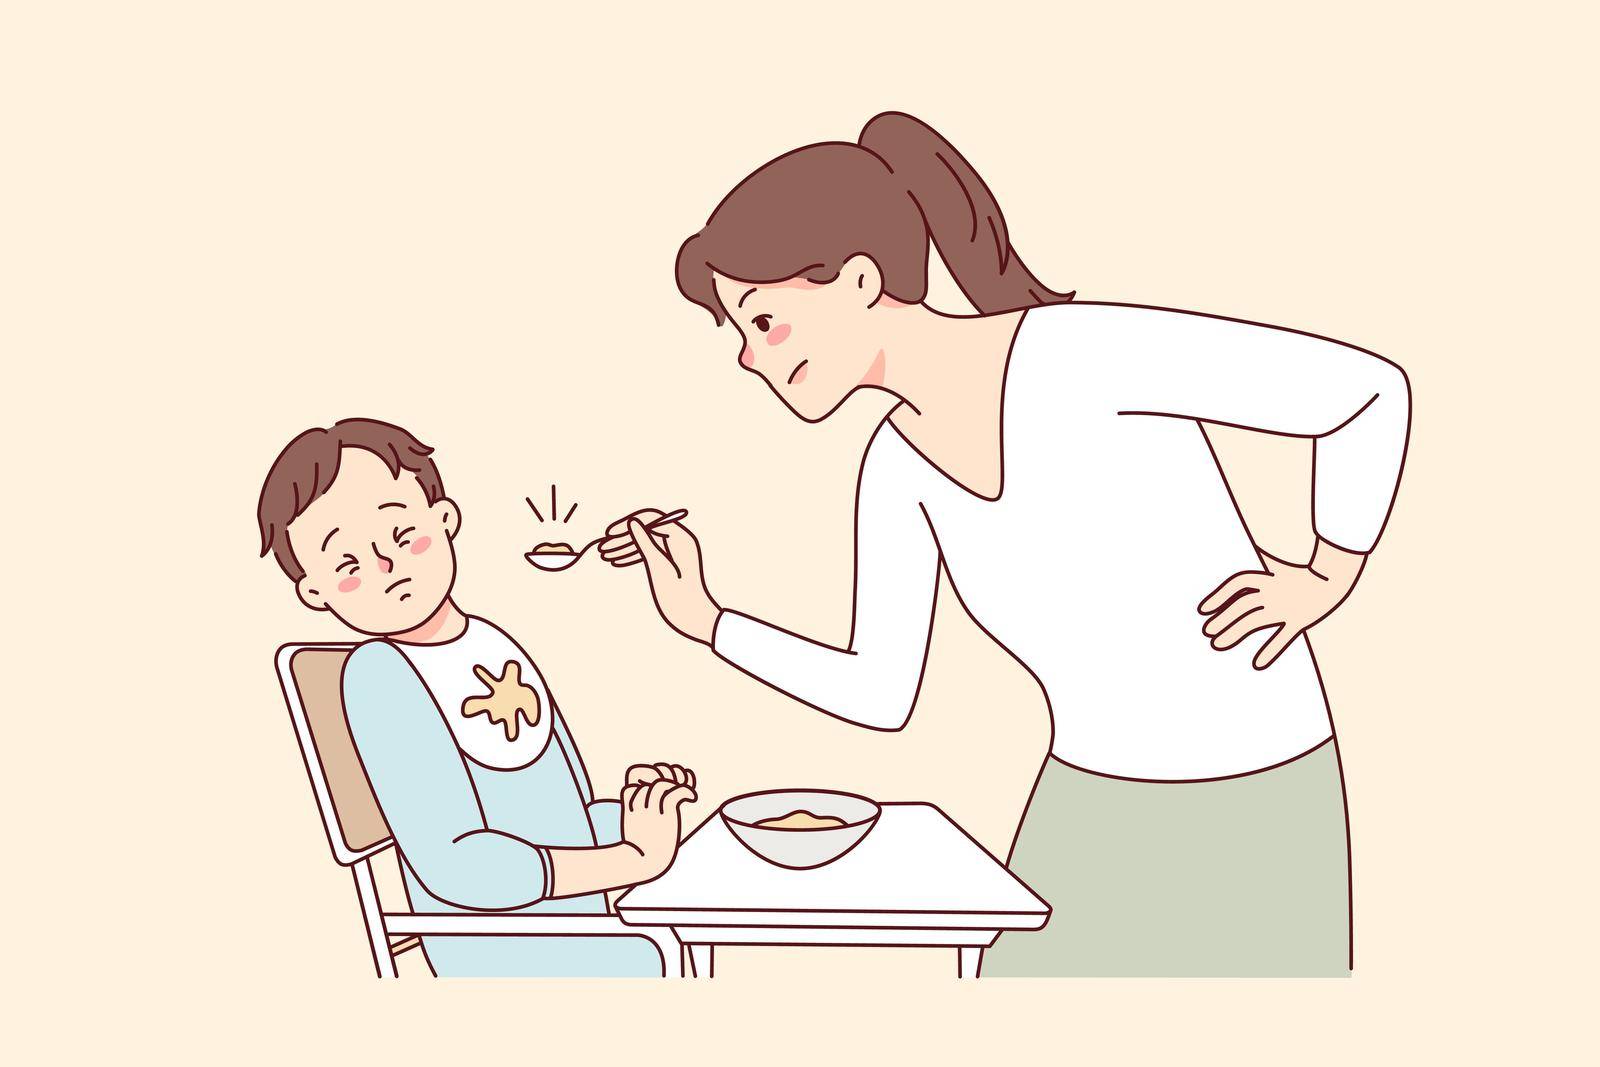 Stubborn baby refuse eating food. Mother feed ill-behaved toddler at home. Parenthood and children upbringing problems. Vector illustration.